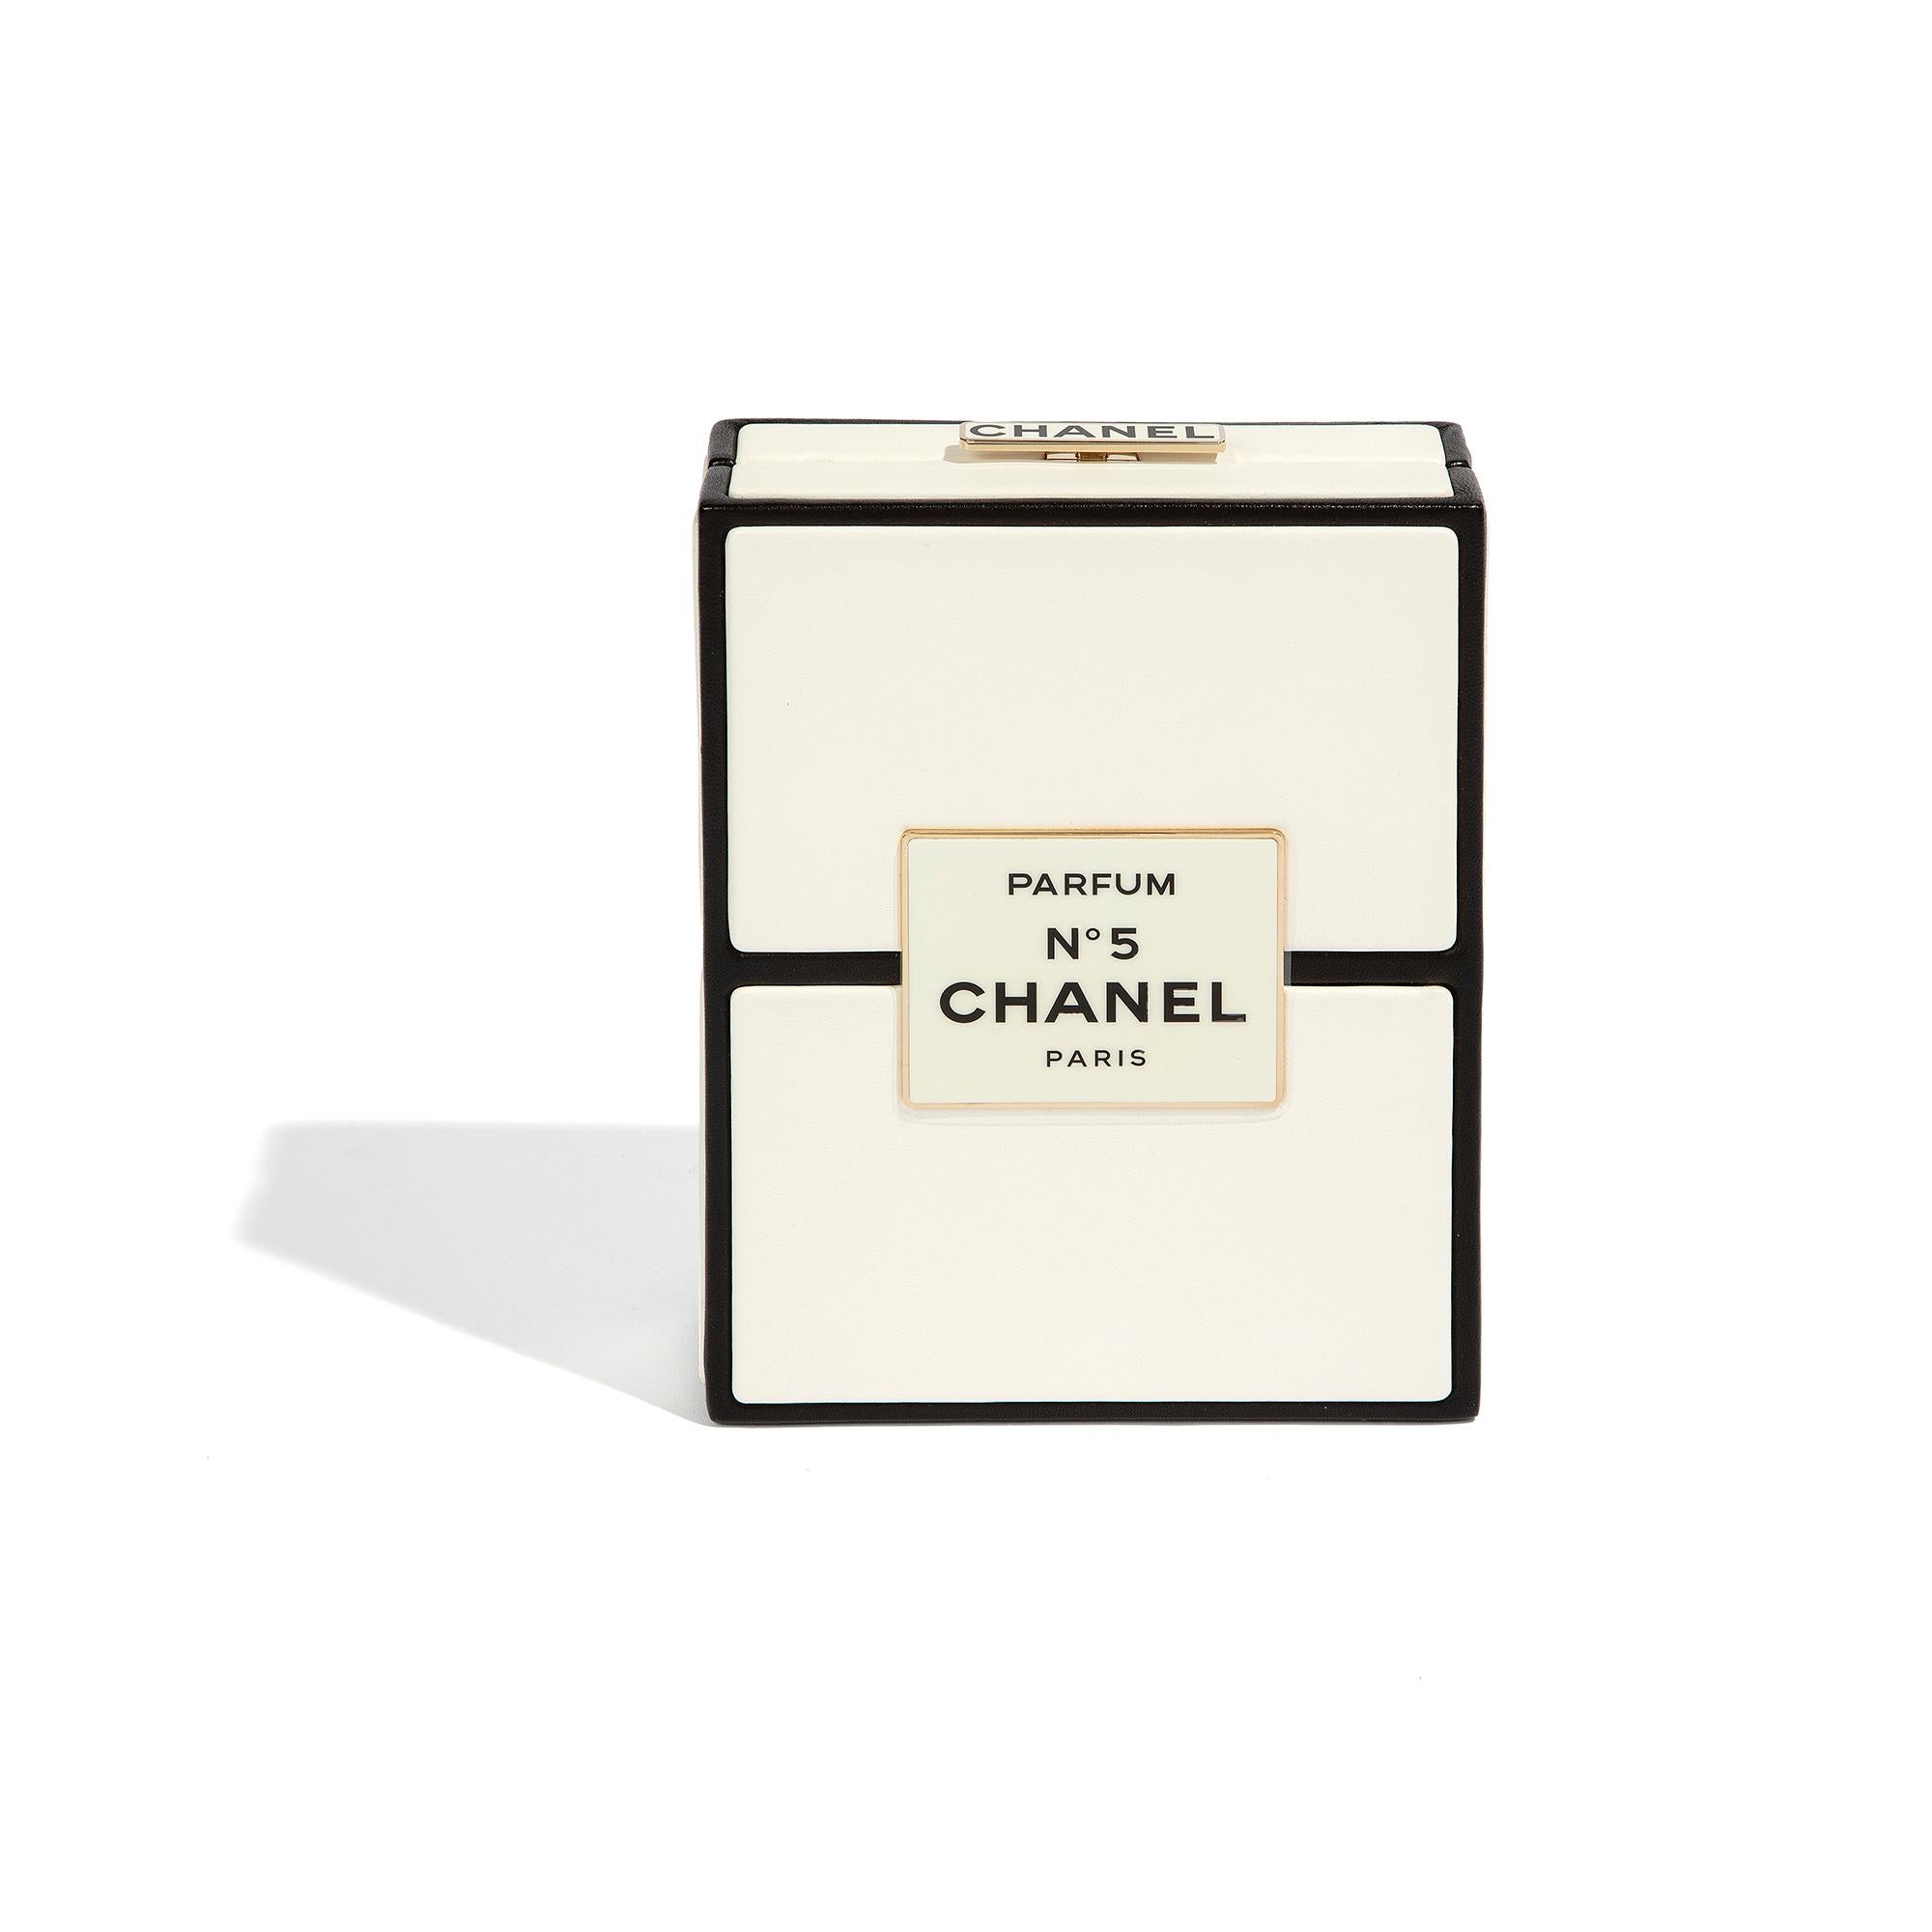 This is a limited edition Chanel Minaudière from the Spring/Summer 2021 collection that comes in a stunning black and white perfume box design. The clutch is in pristine condition, free from any signs of wear and tear, and comes with its original